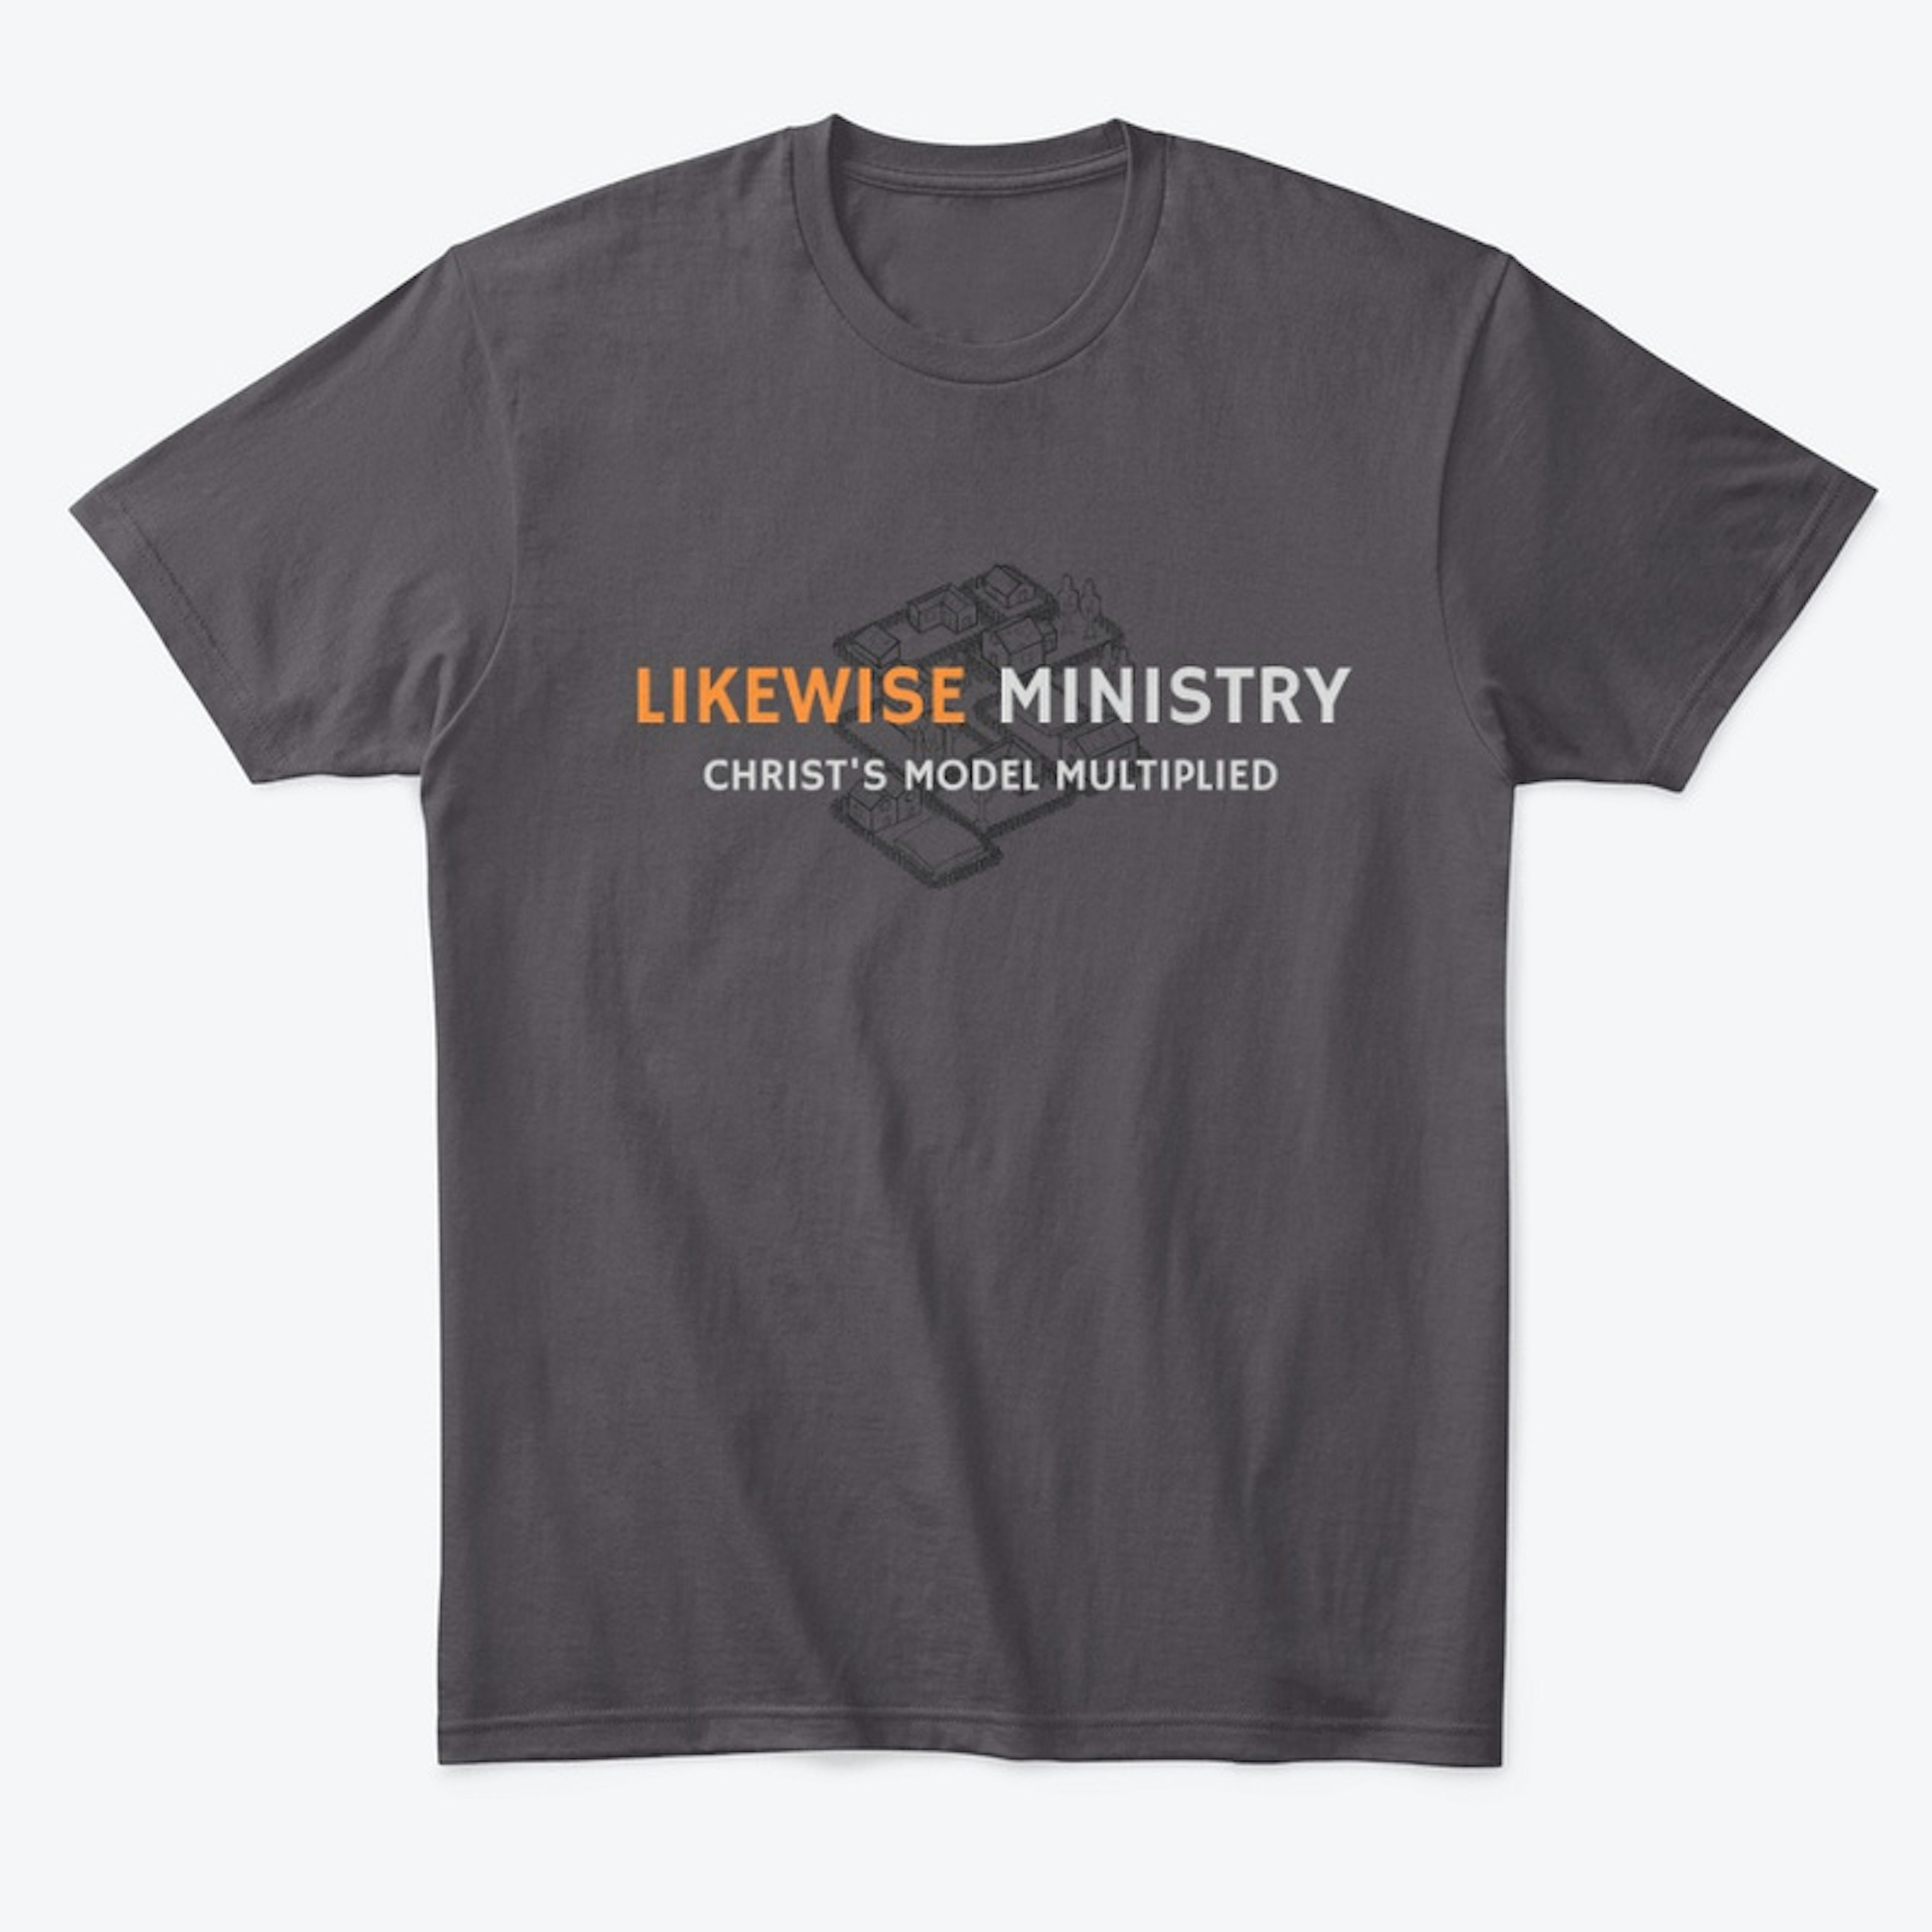 Likewise Ministry